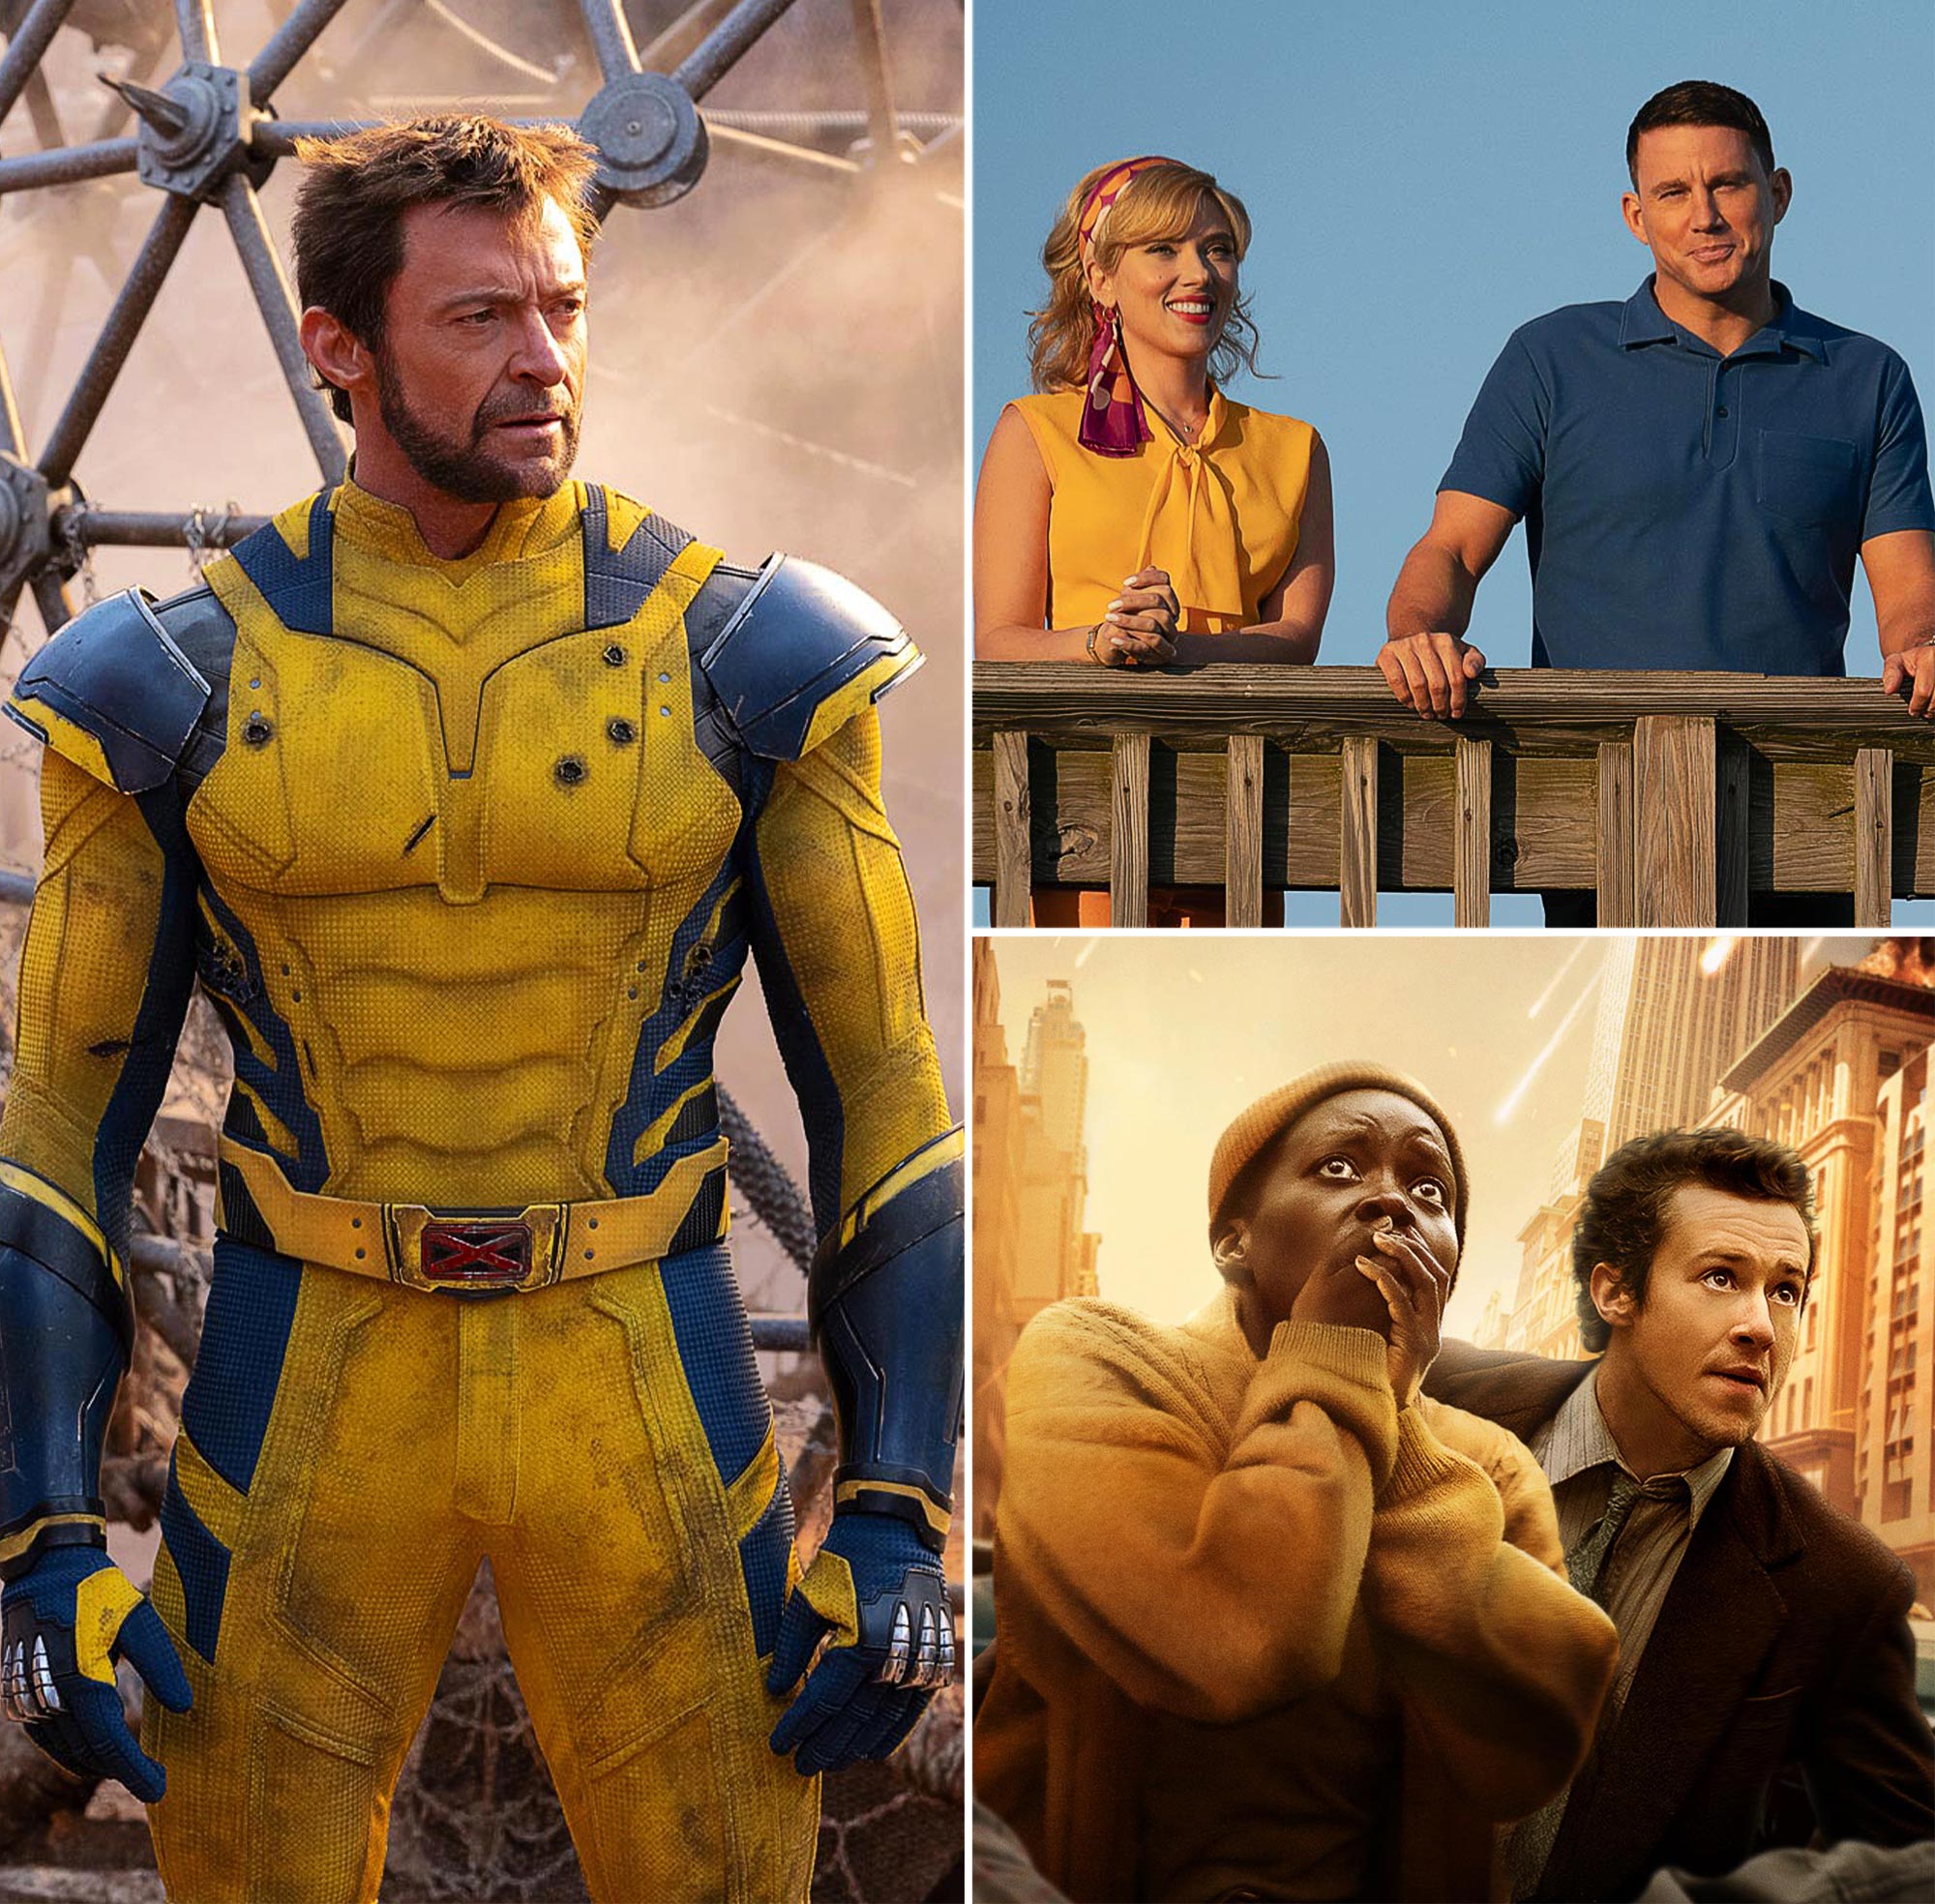 Us’ Complete Guide to Summer’s Biggest Blockbuster Movies